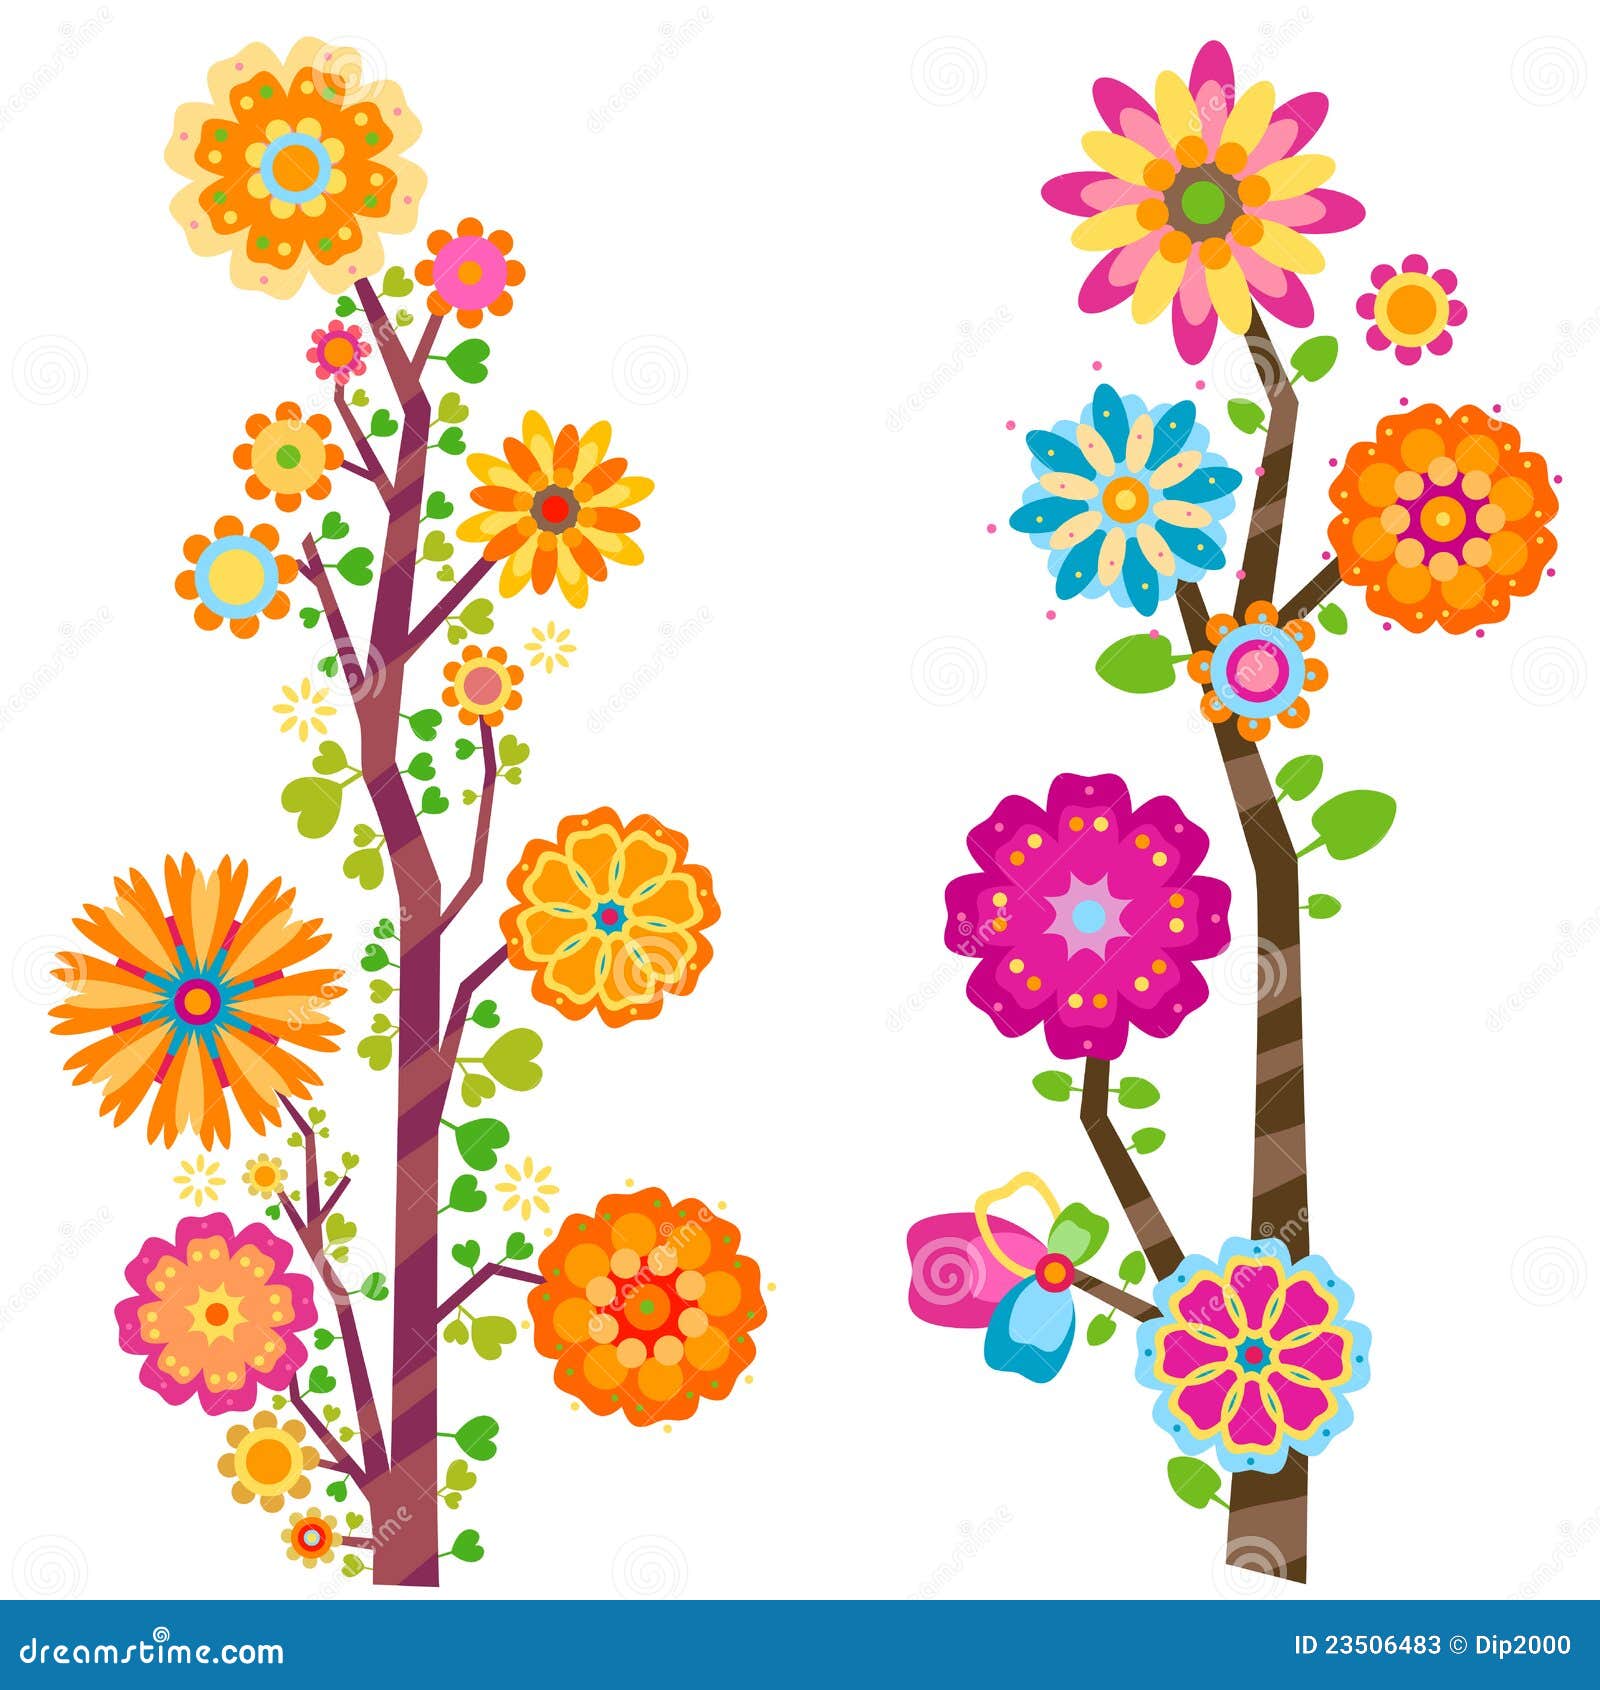 clipart trees and flowers - photo #16